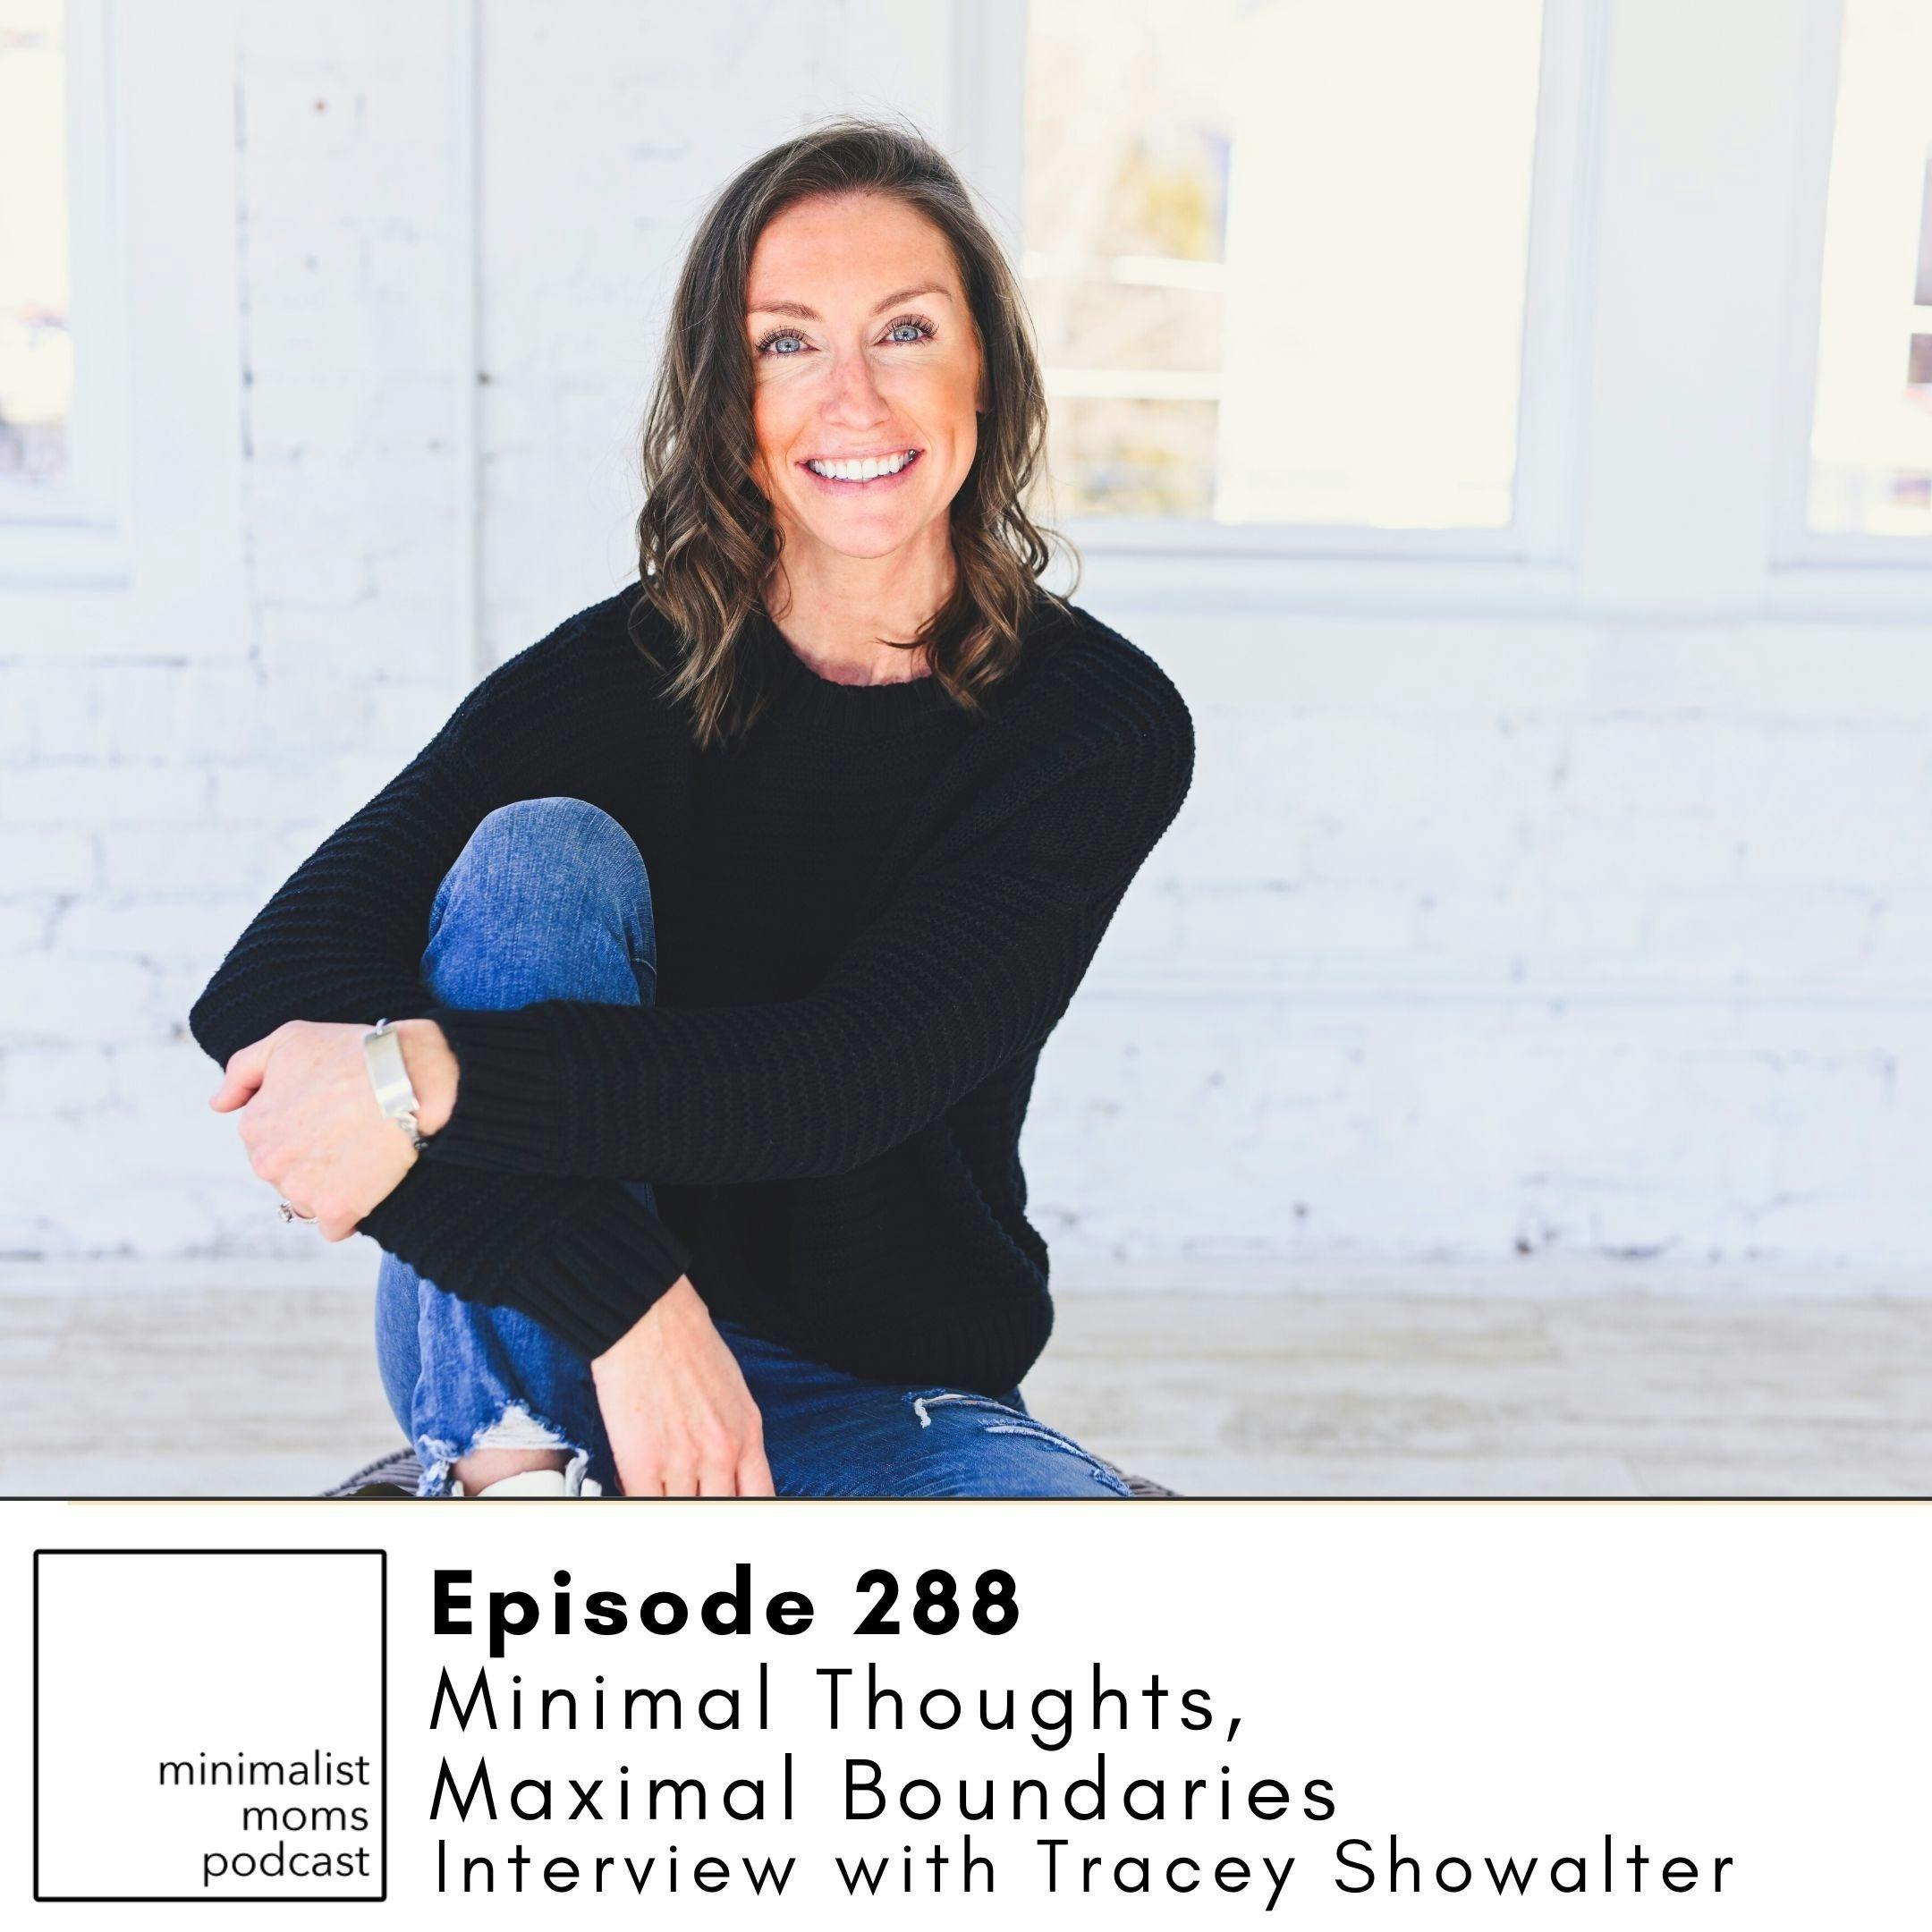 EP288: Minimal Thoughts, Maximal Boundaries with Tracey Showalter